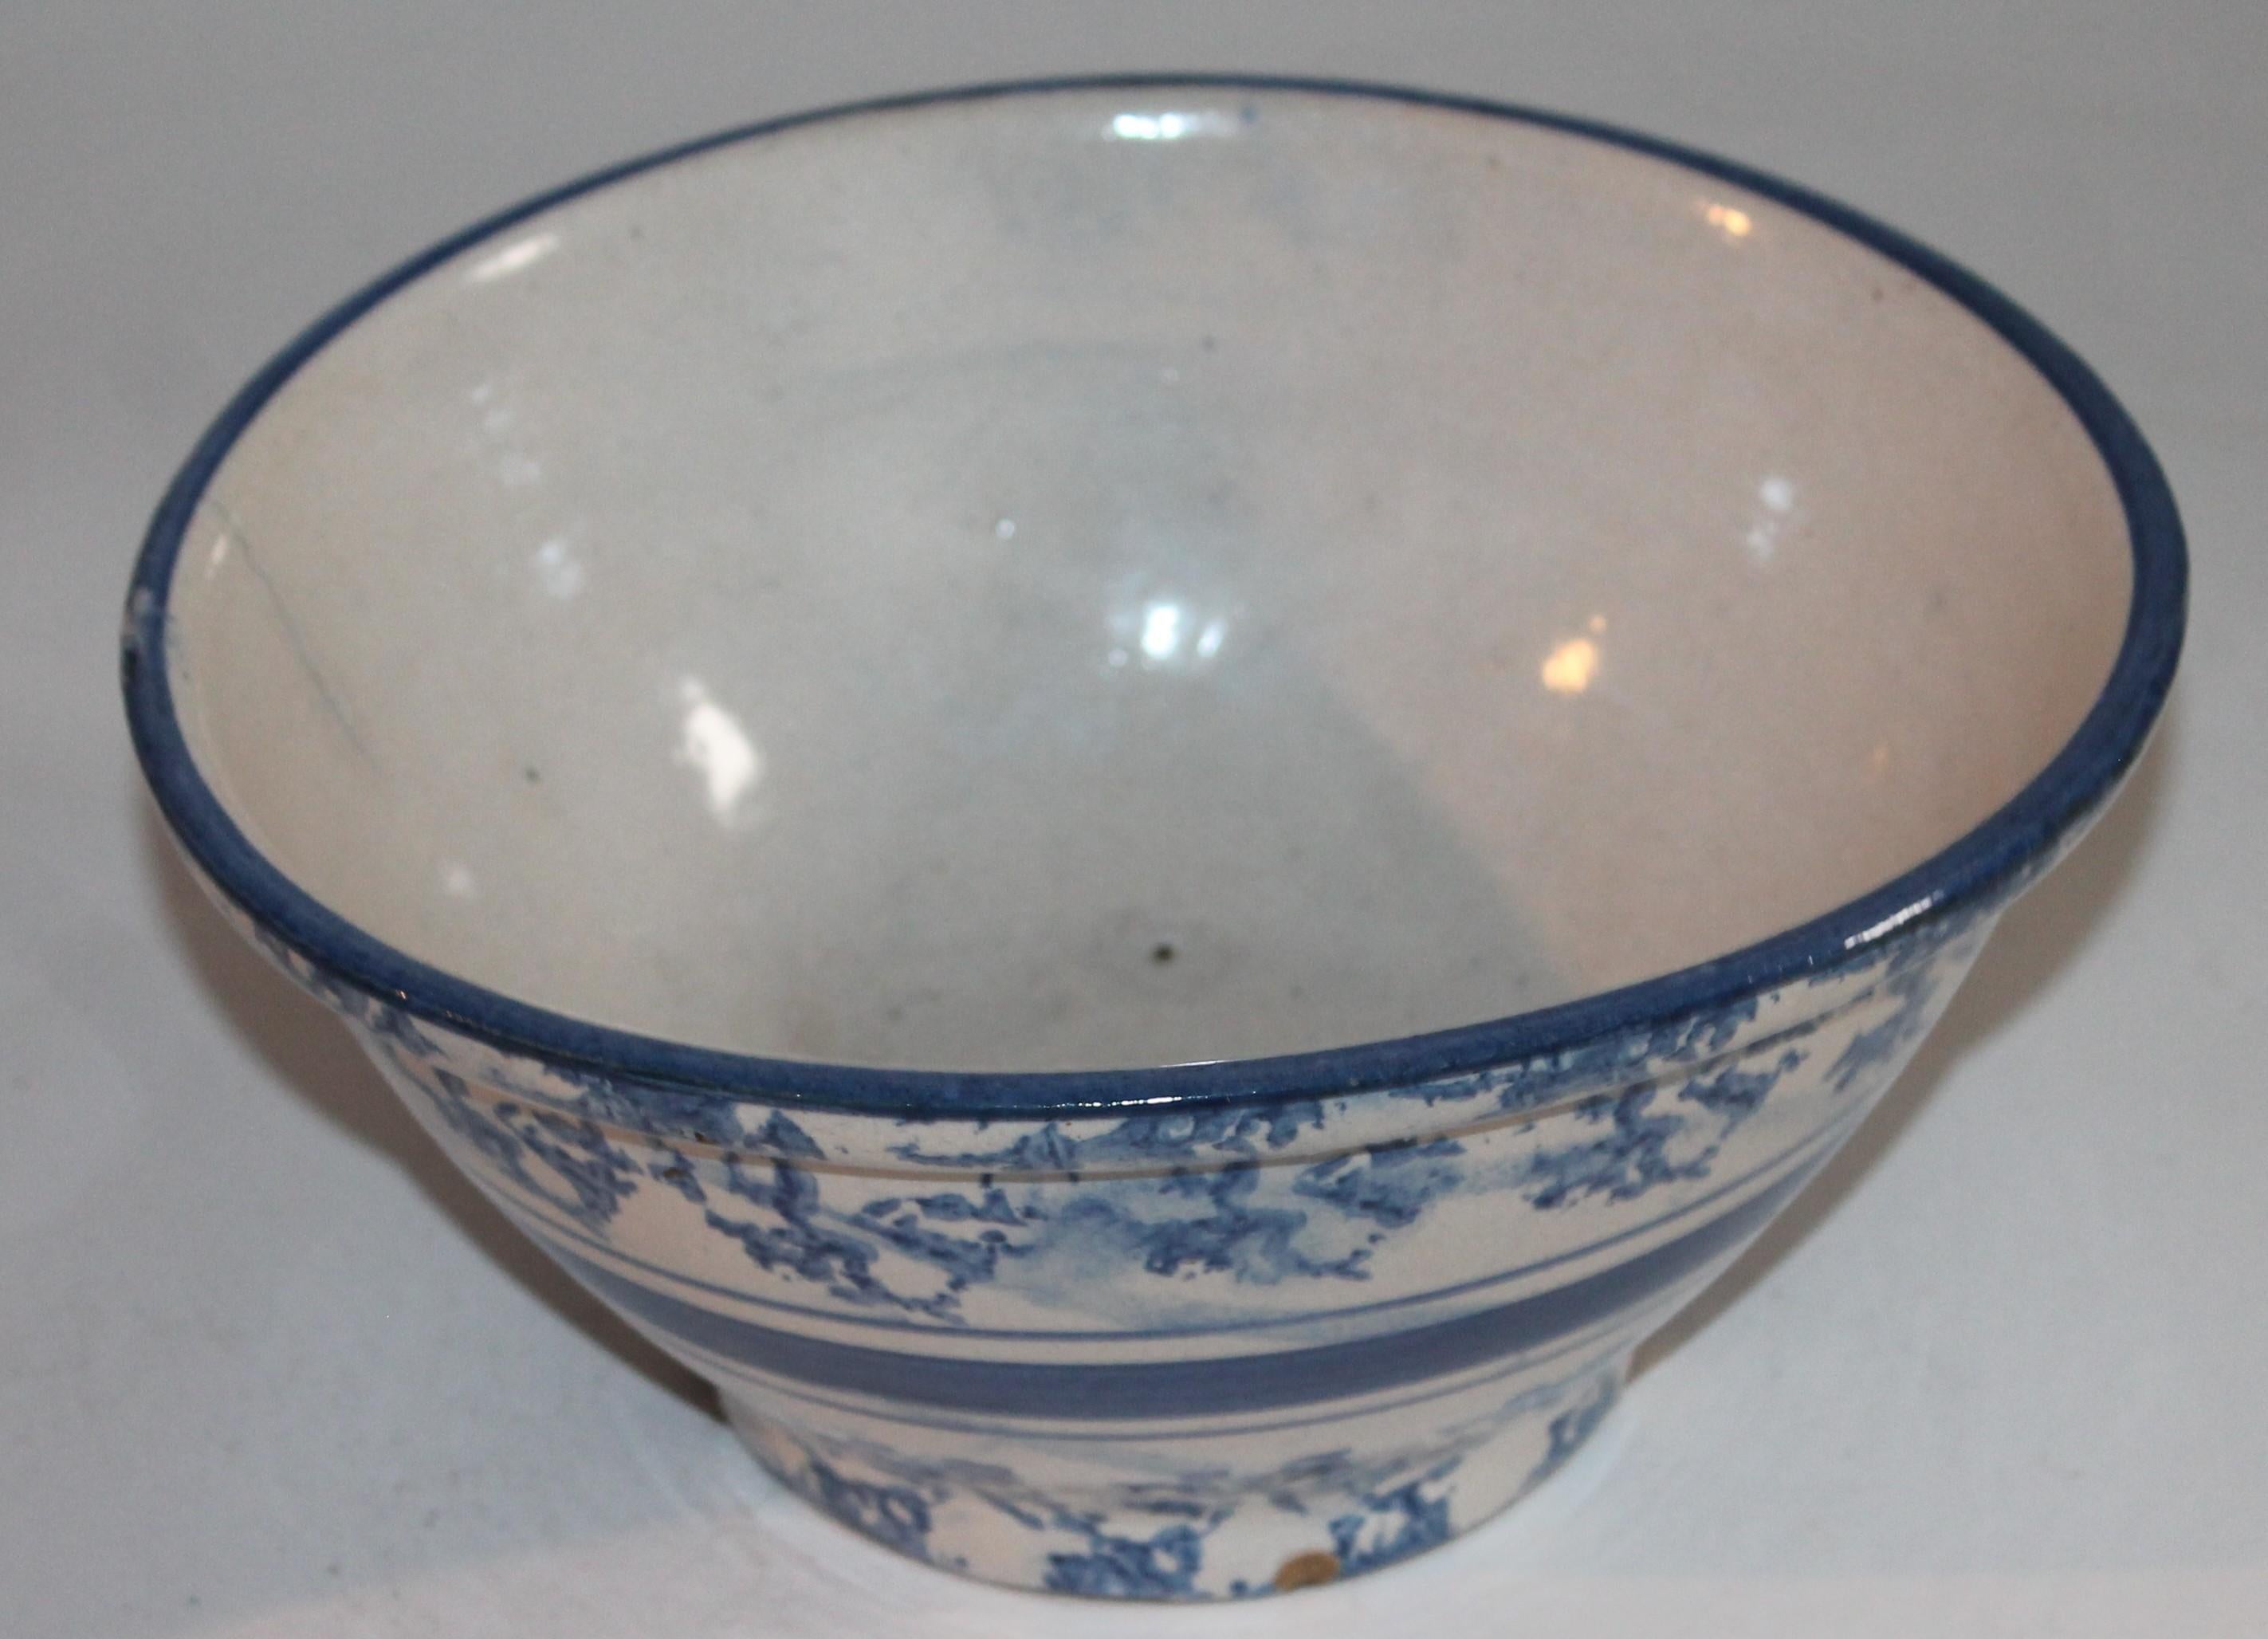 This fine sponge ware bowl has a minor age crack but wonderful color and form,.